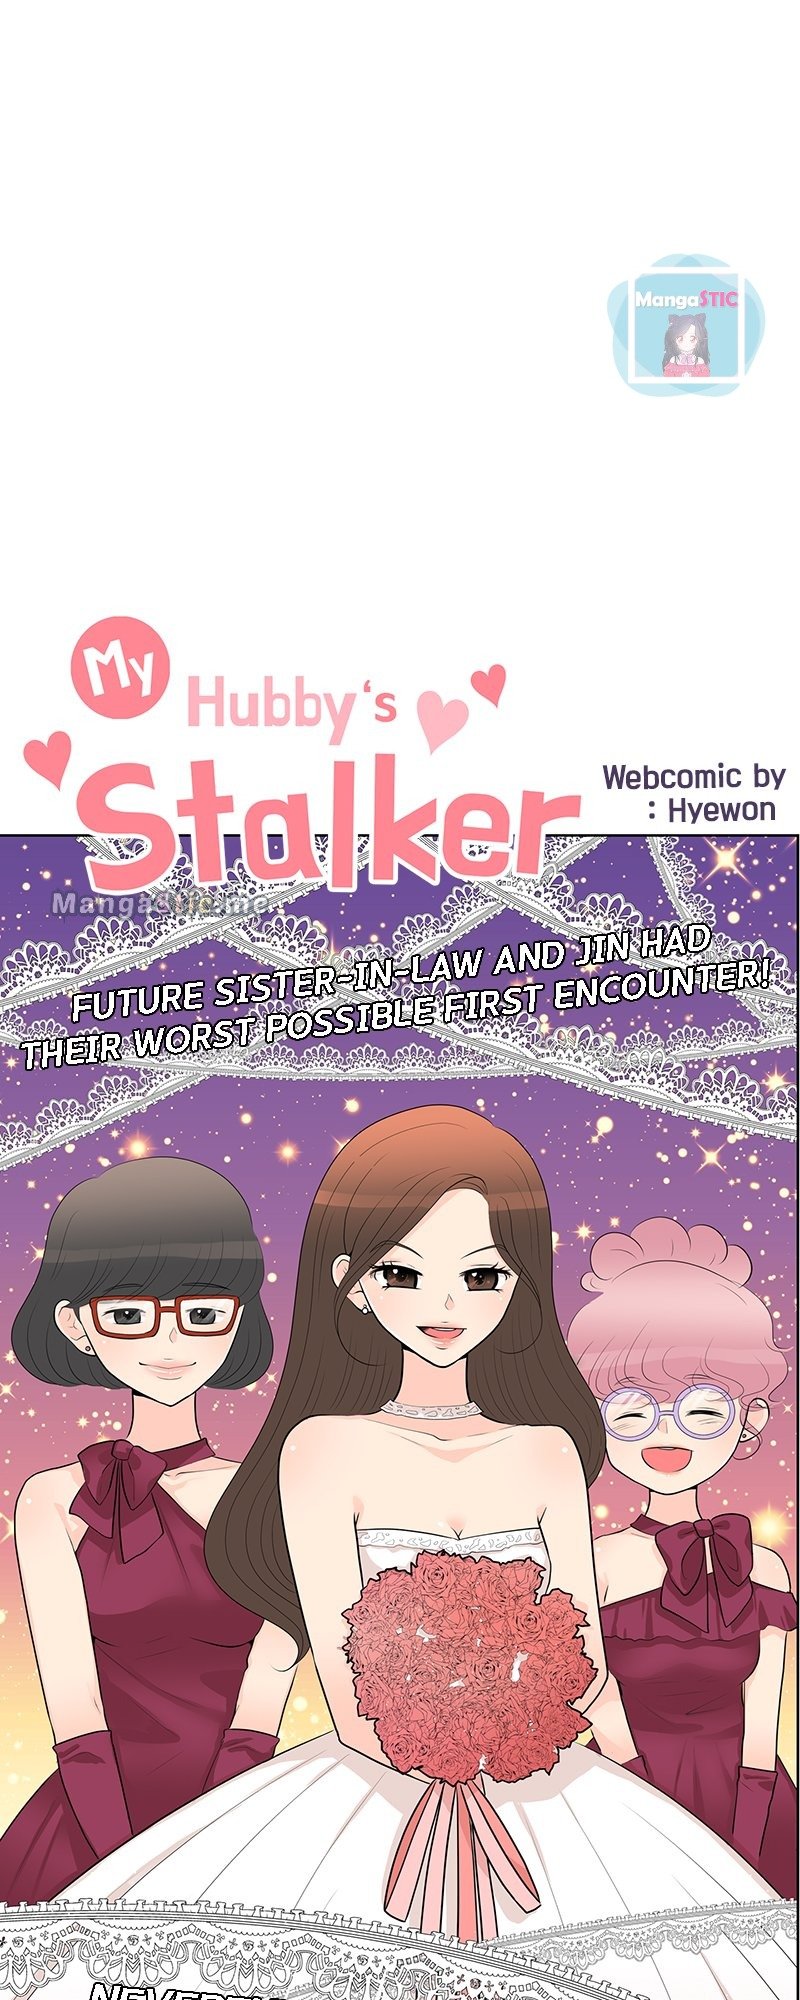 My Hubby’s Stalker chapter 21